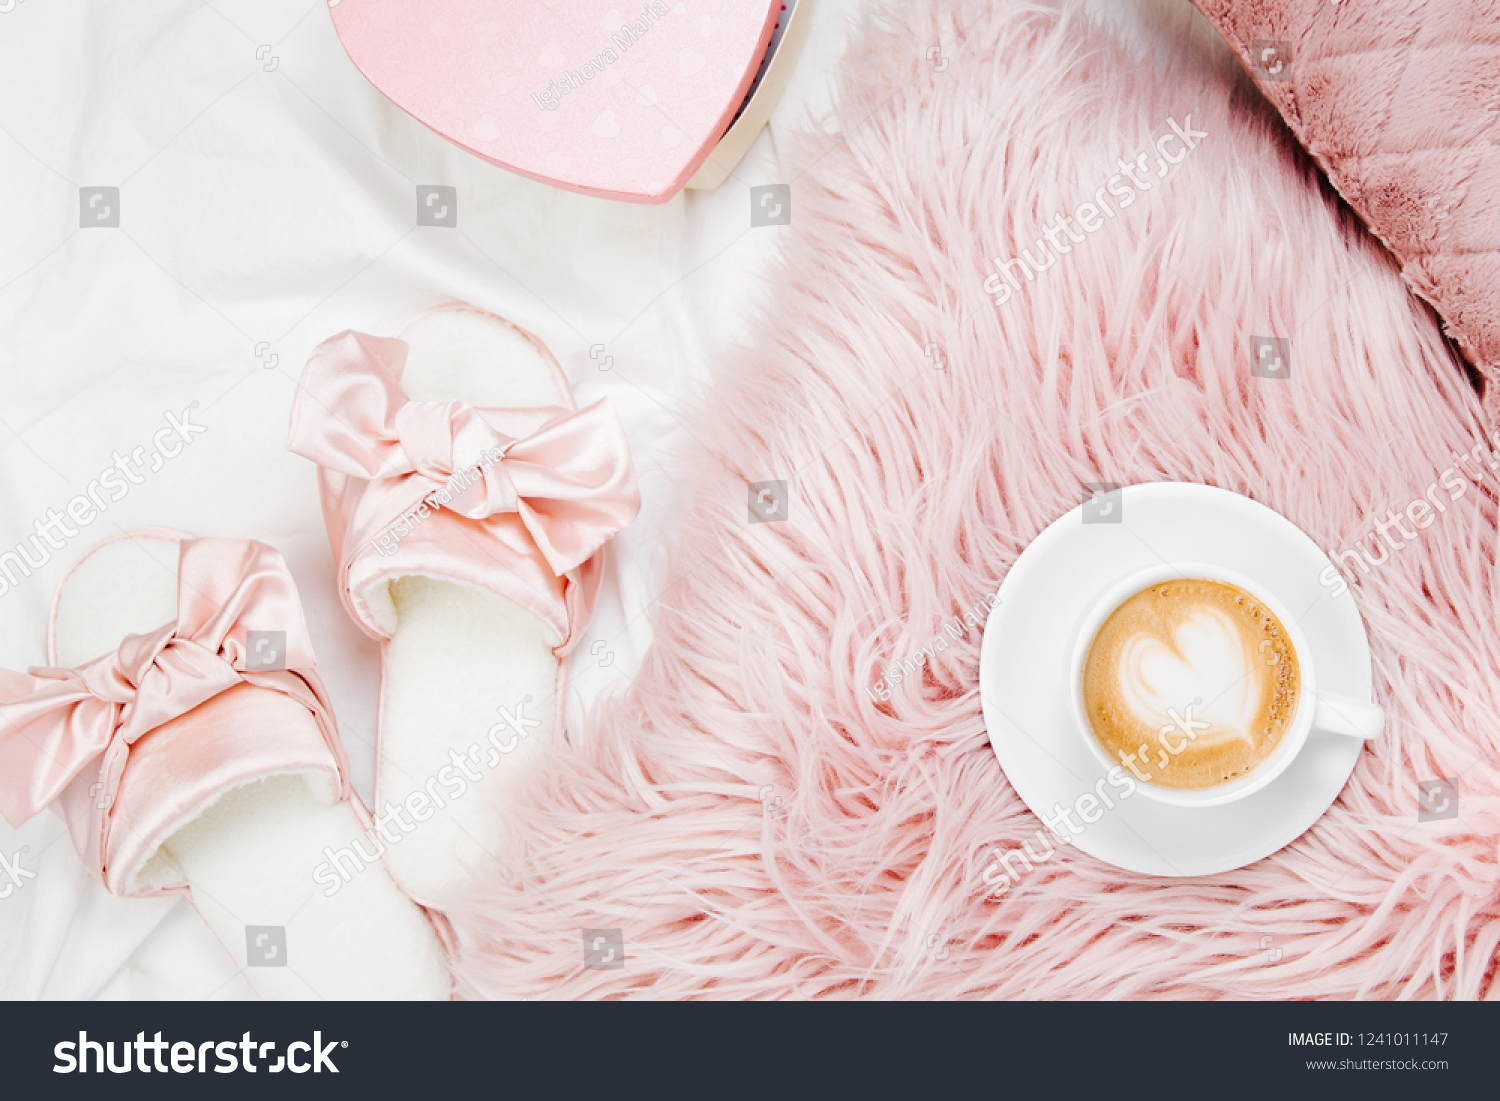 Morning concept. A cup of coffee on a pink pillow, slippers on the bed. Flat lay, top view #1241011147